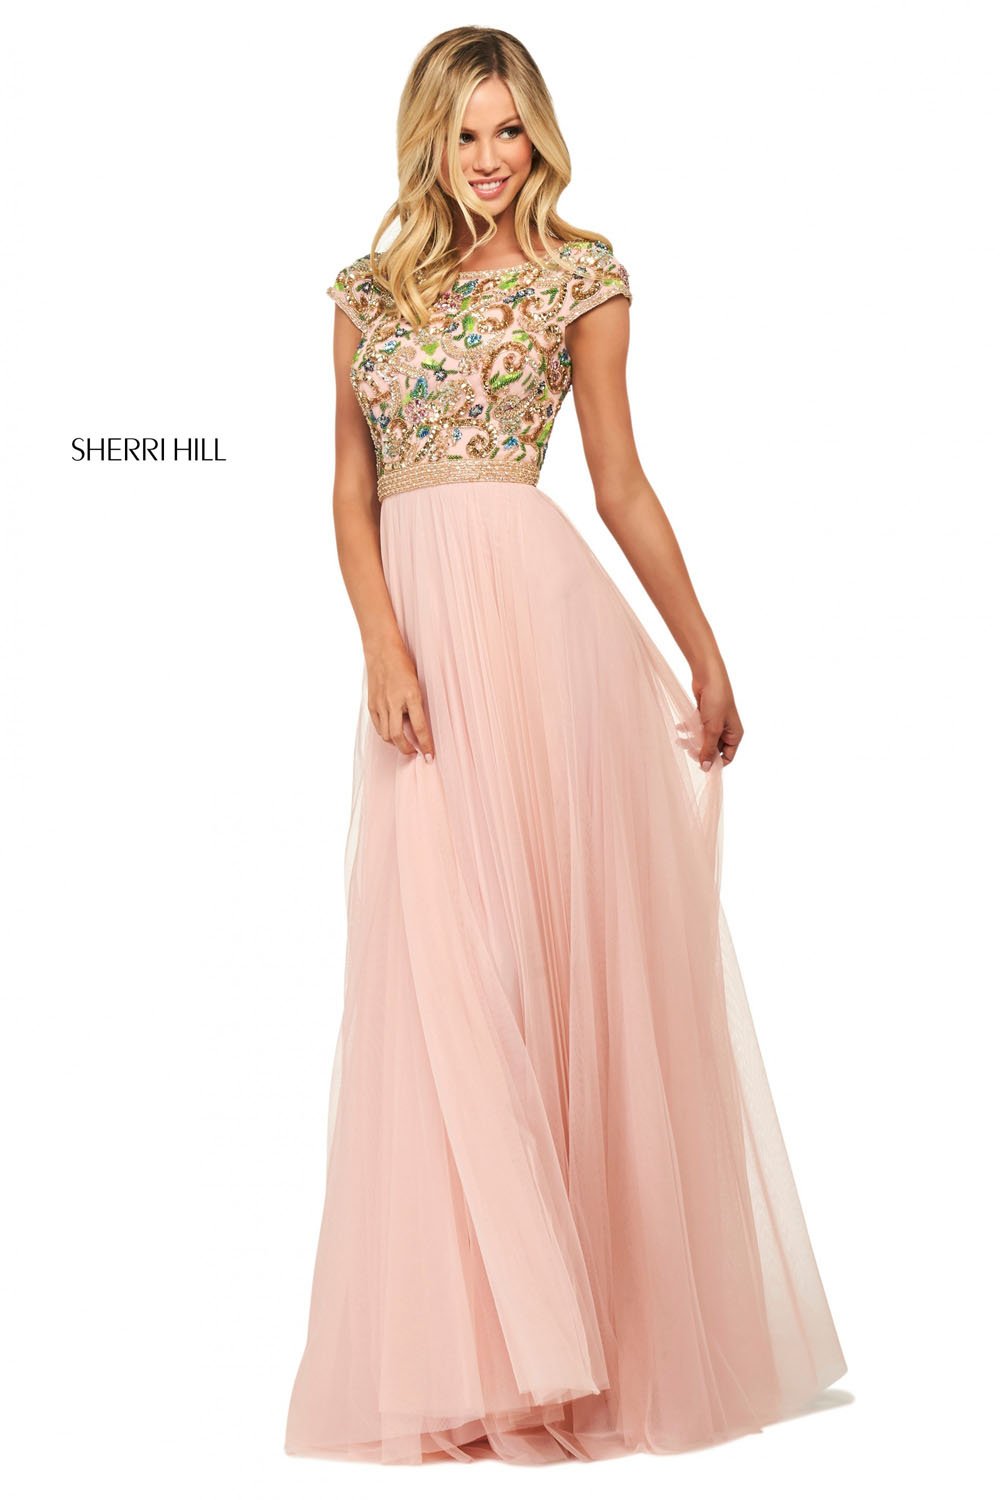 Sherri Hill 53543 dress images in these colors: Blush Multi.